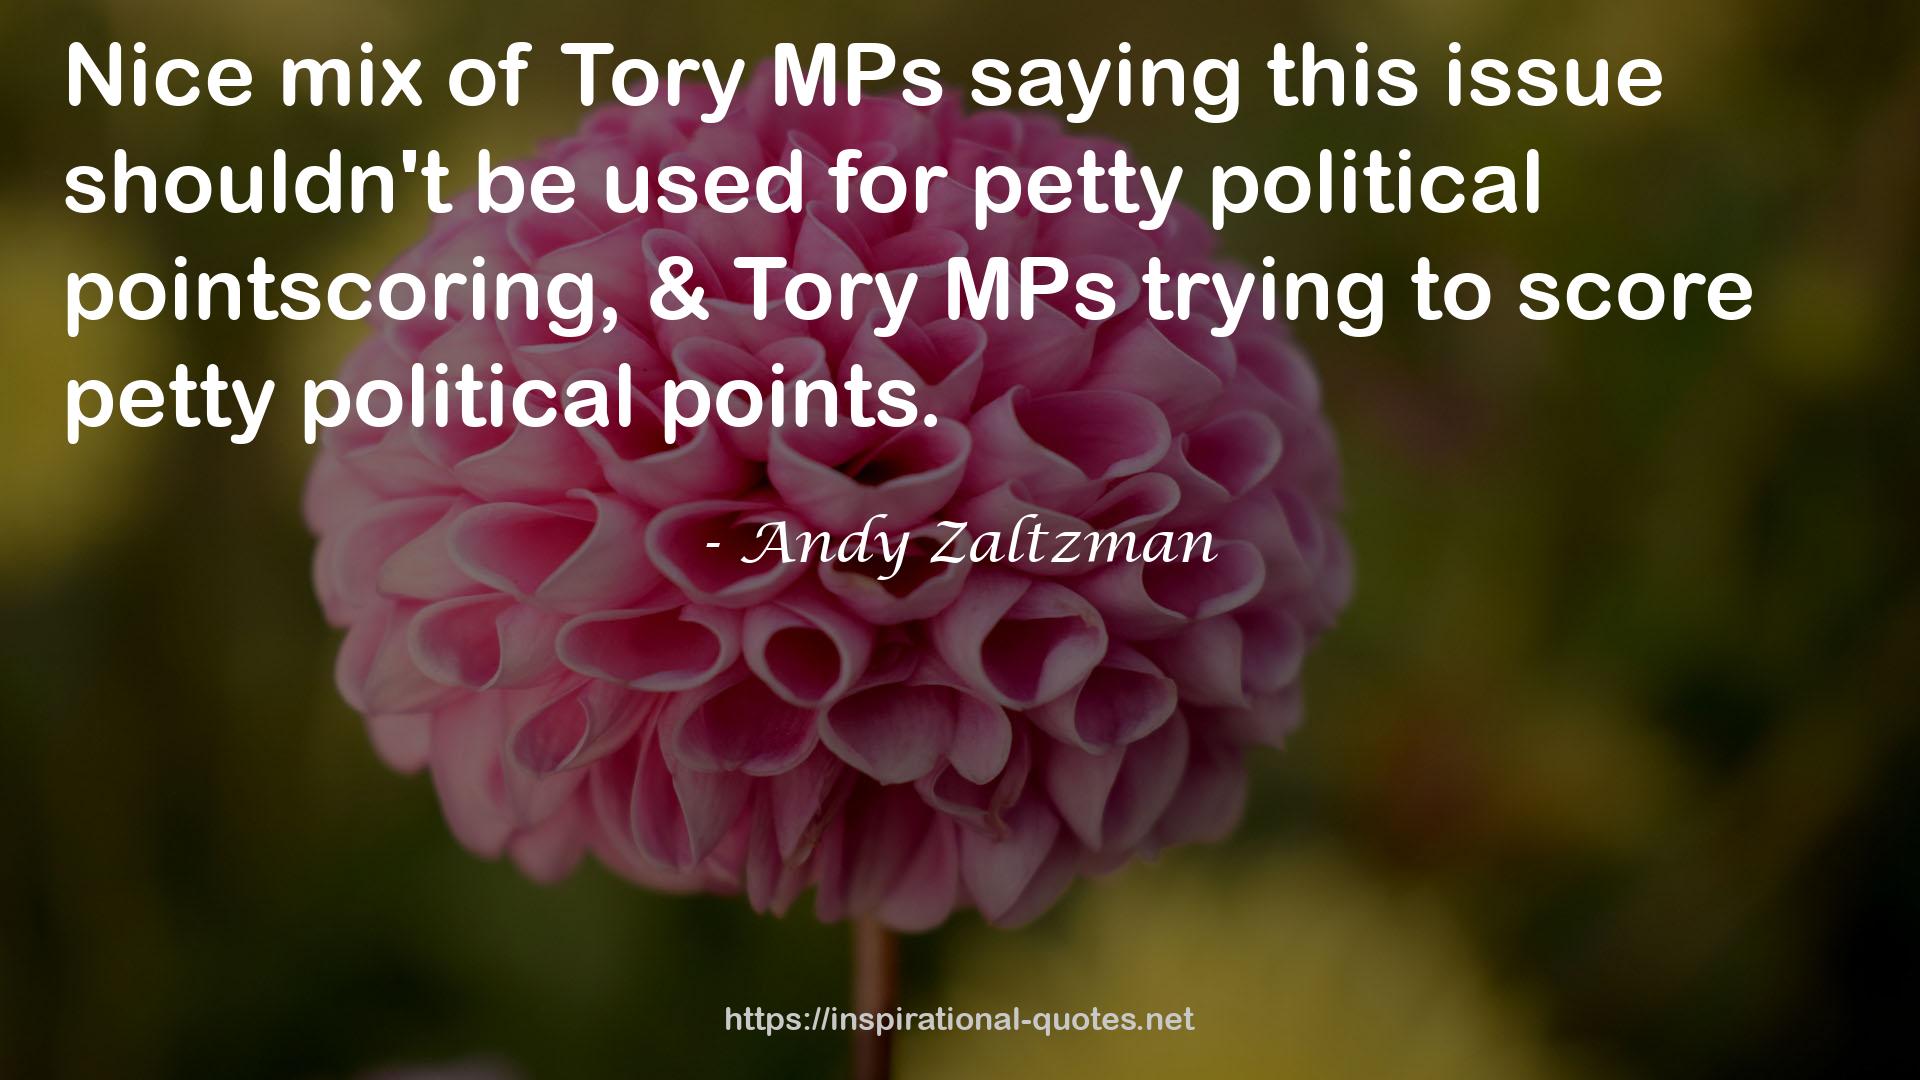 MPs  QUOTES